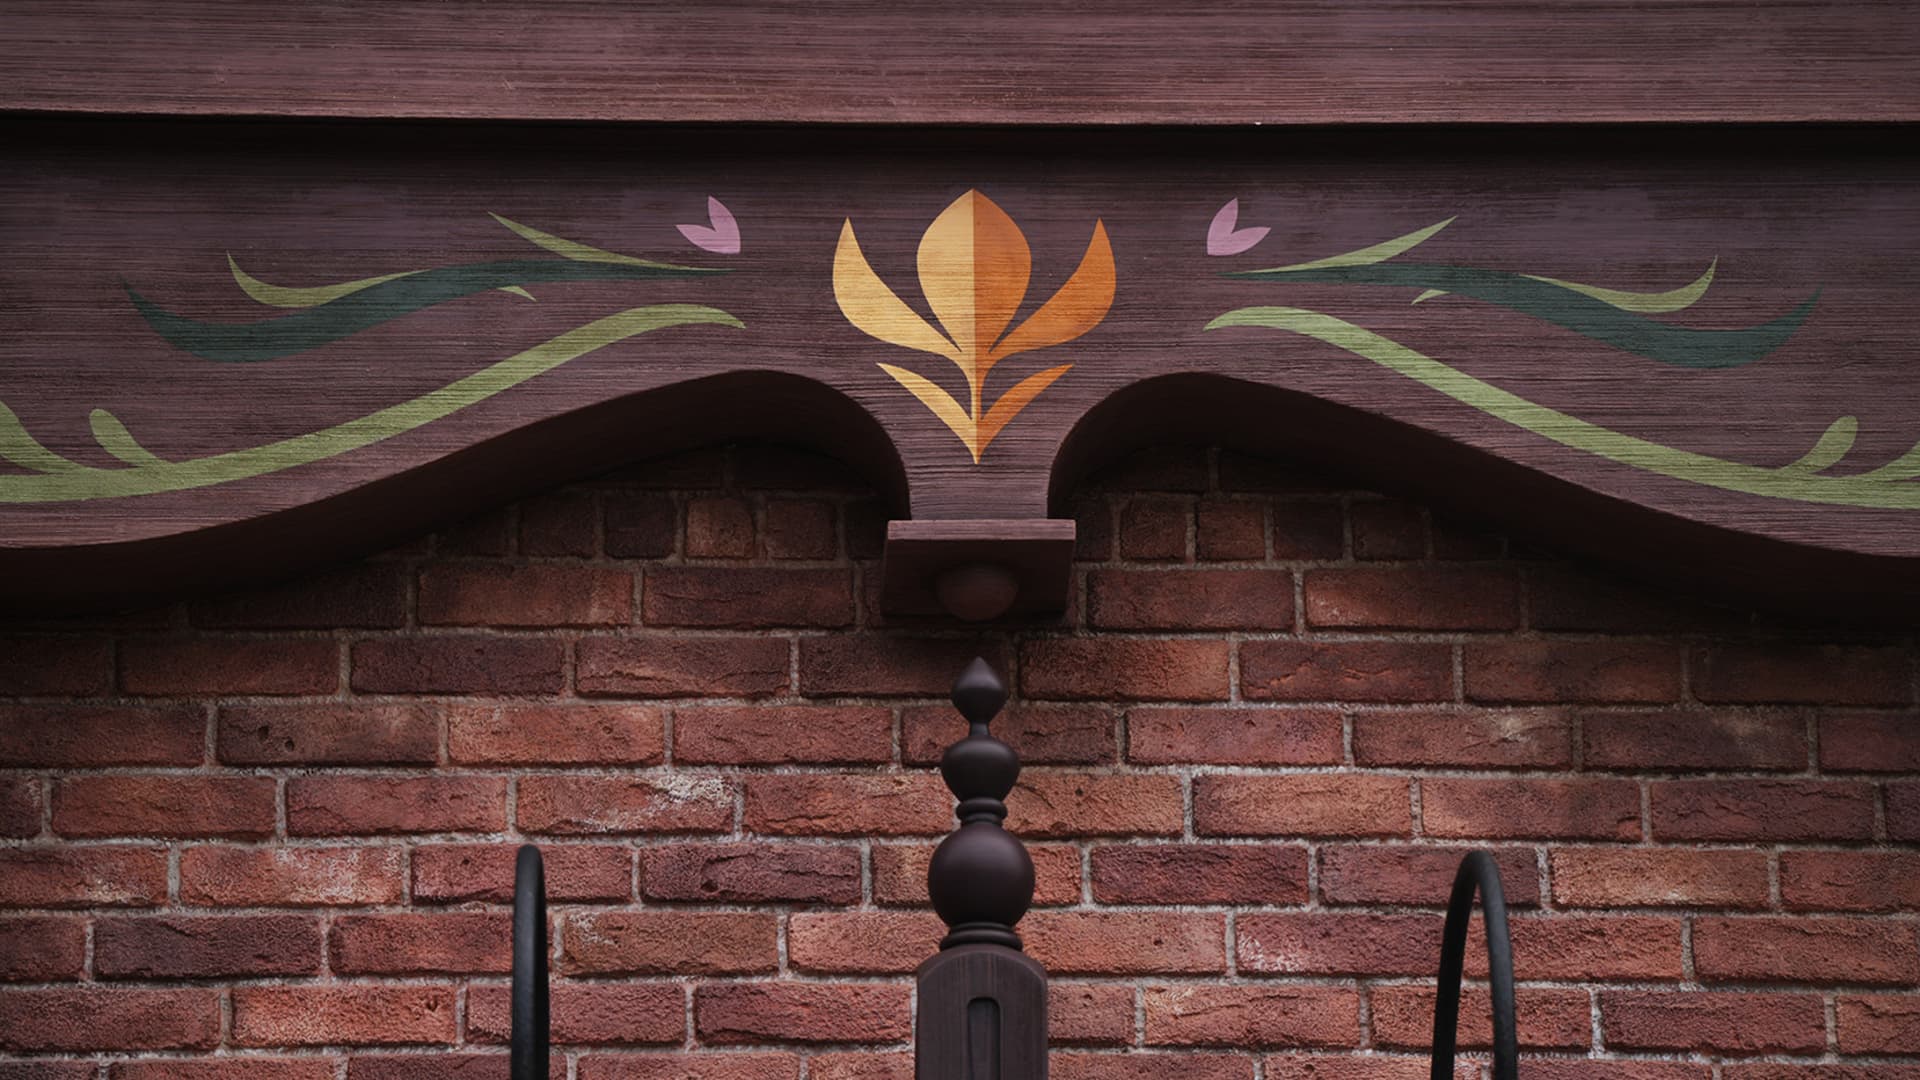 Rosemaling, a floral decorative folk painting from Norway, can be seen painted on the buildings in World of Frozen.